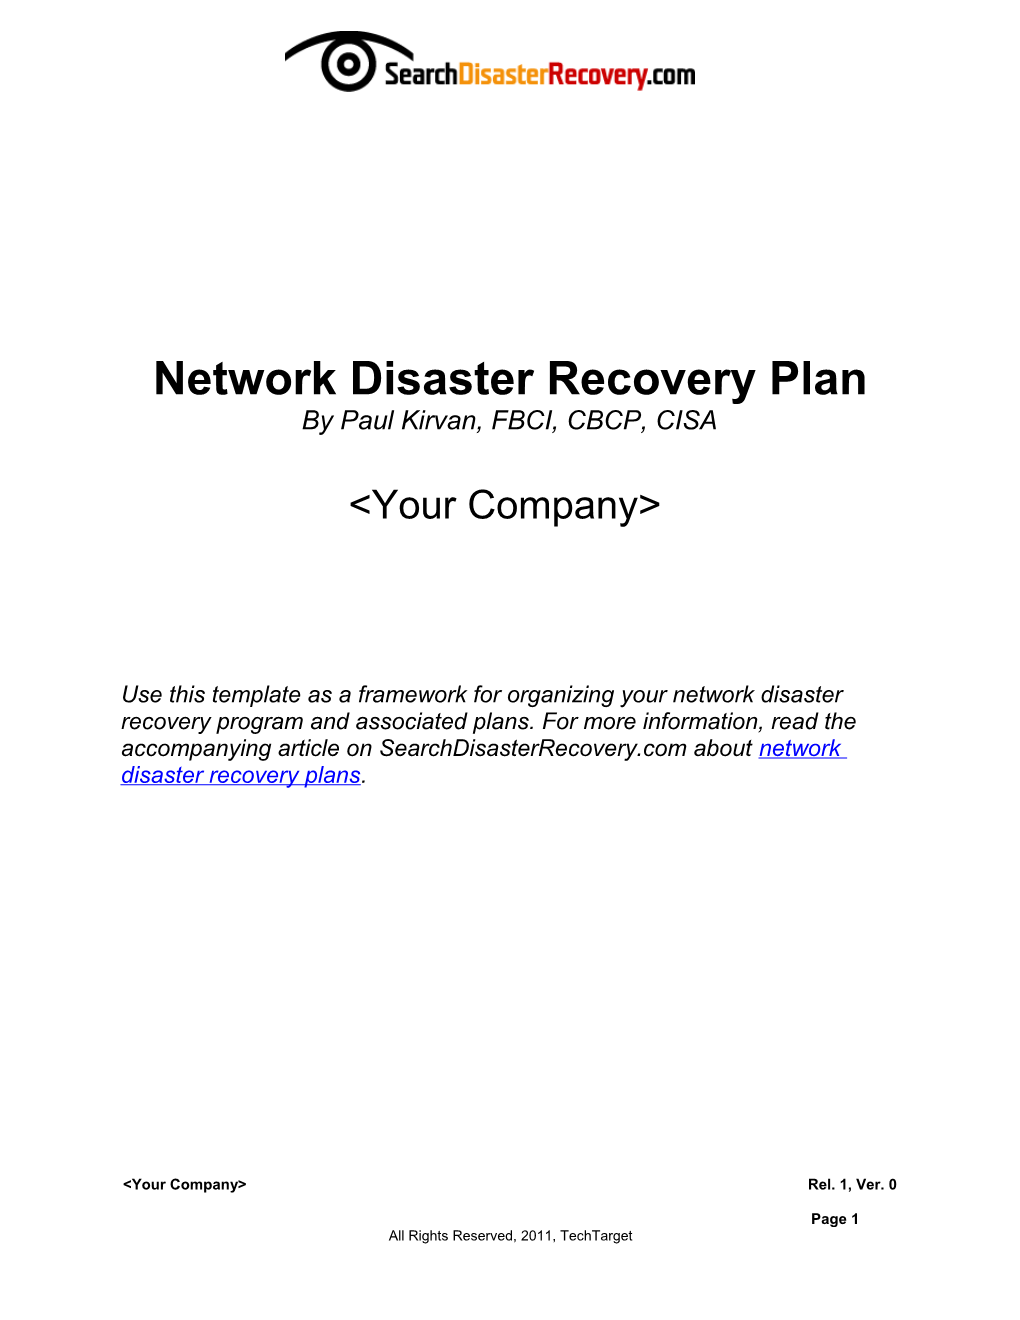 Network Disaster Recovery Plan